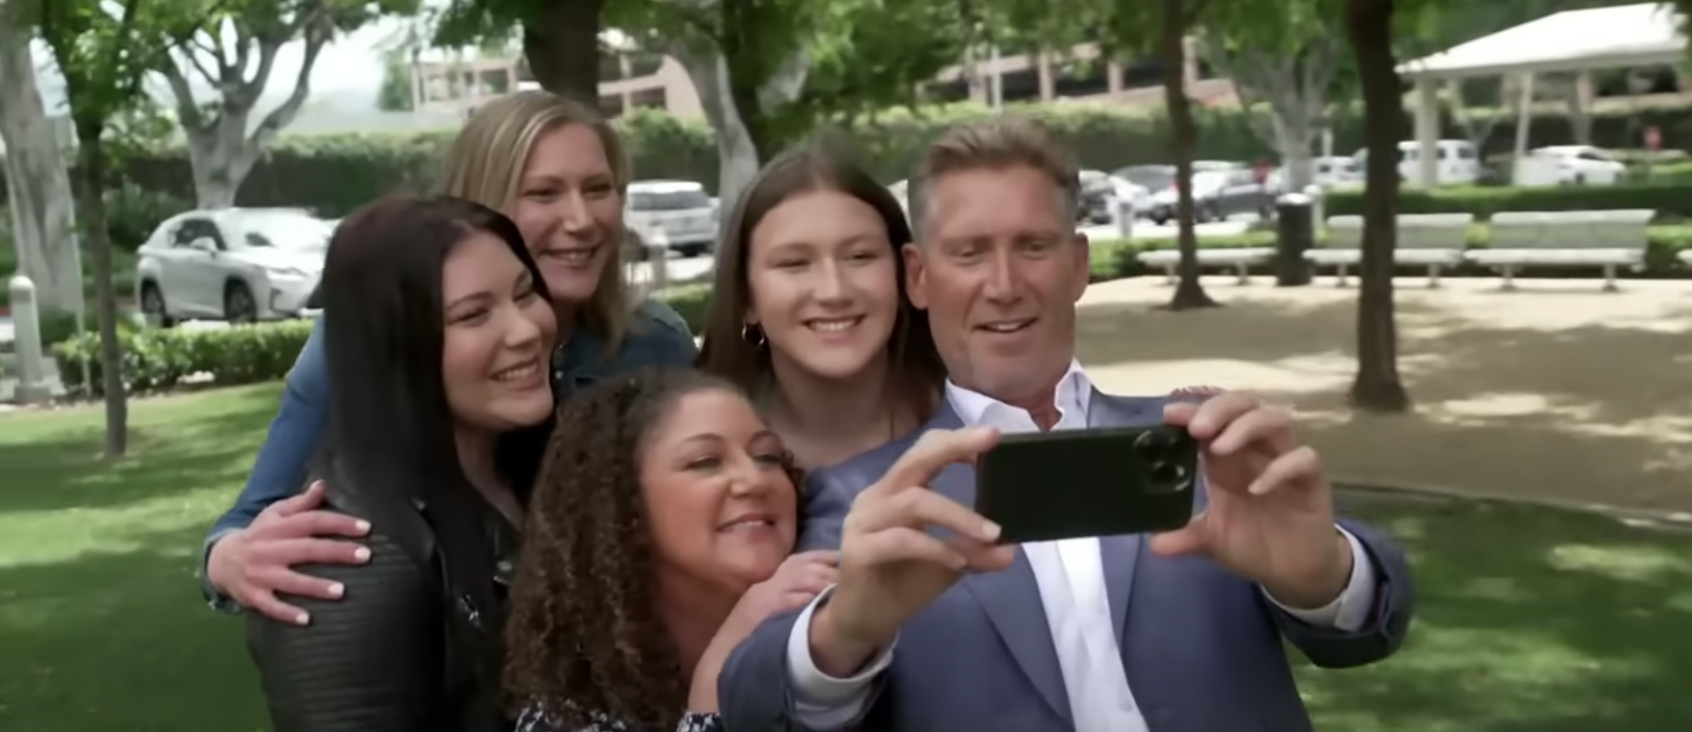 Angie Warner, Jenny Young, and Charlie and Payton Young with Gerry Turner in the spinoff "The Golden Bachelor" on July 17, 2023 | Source: YouTube/Good Morning America